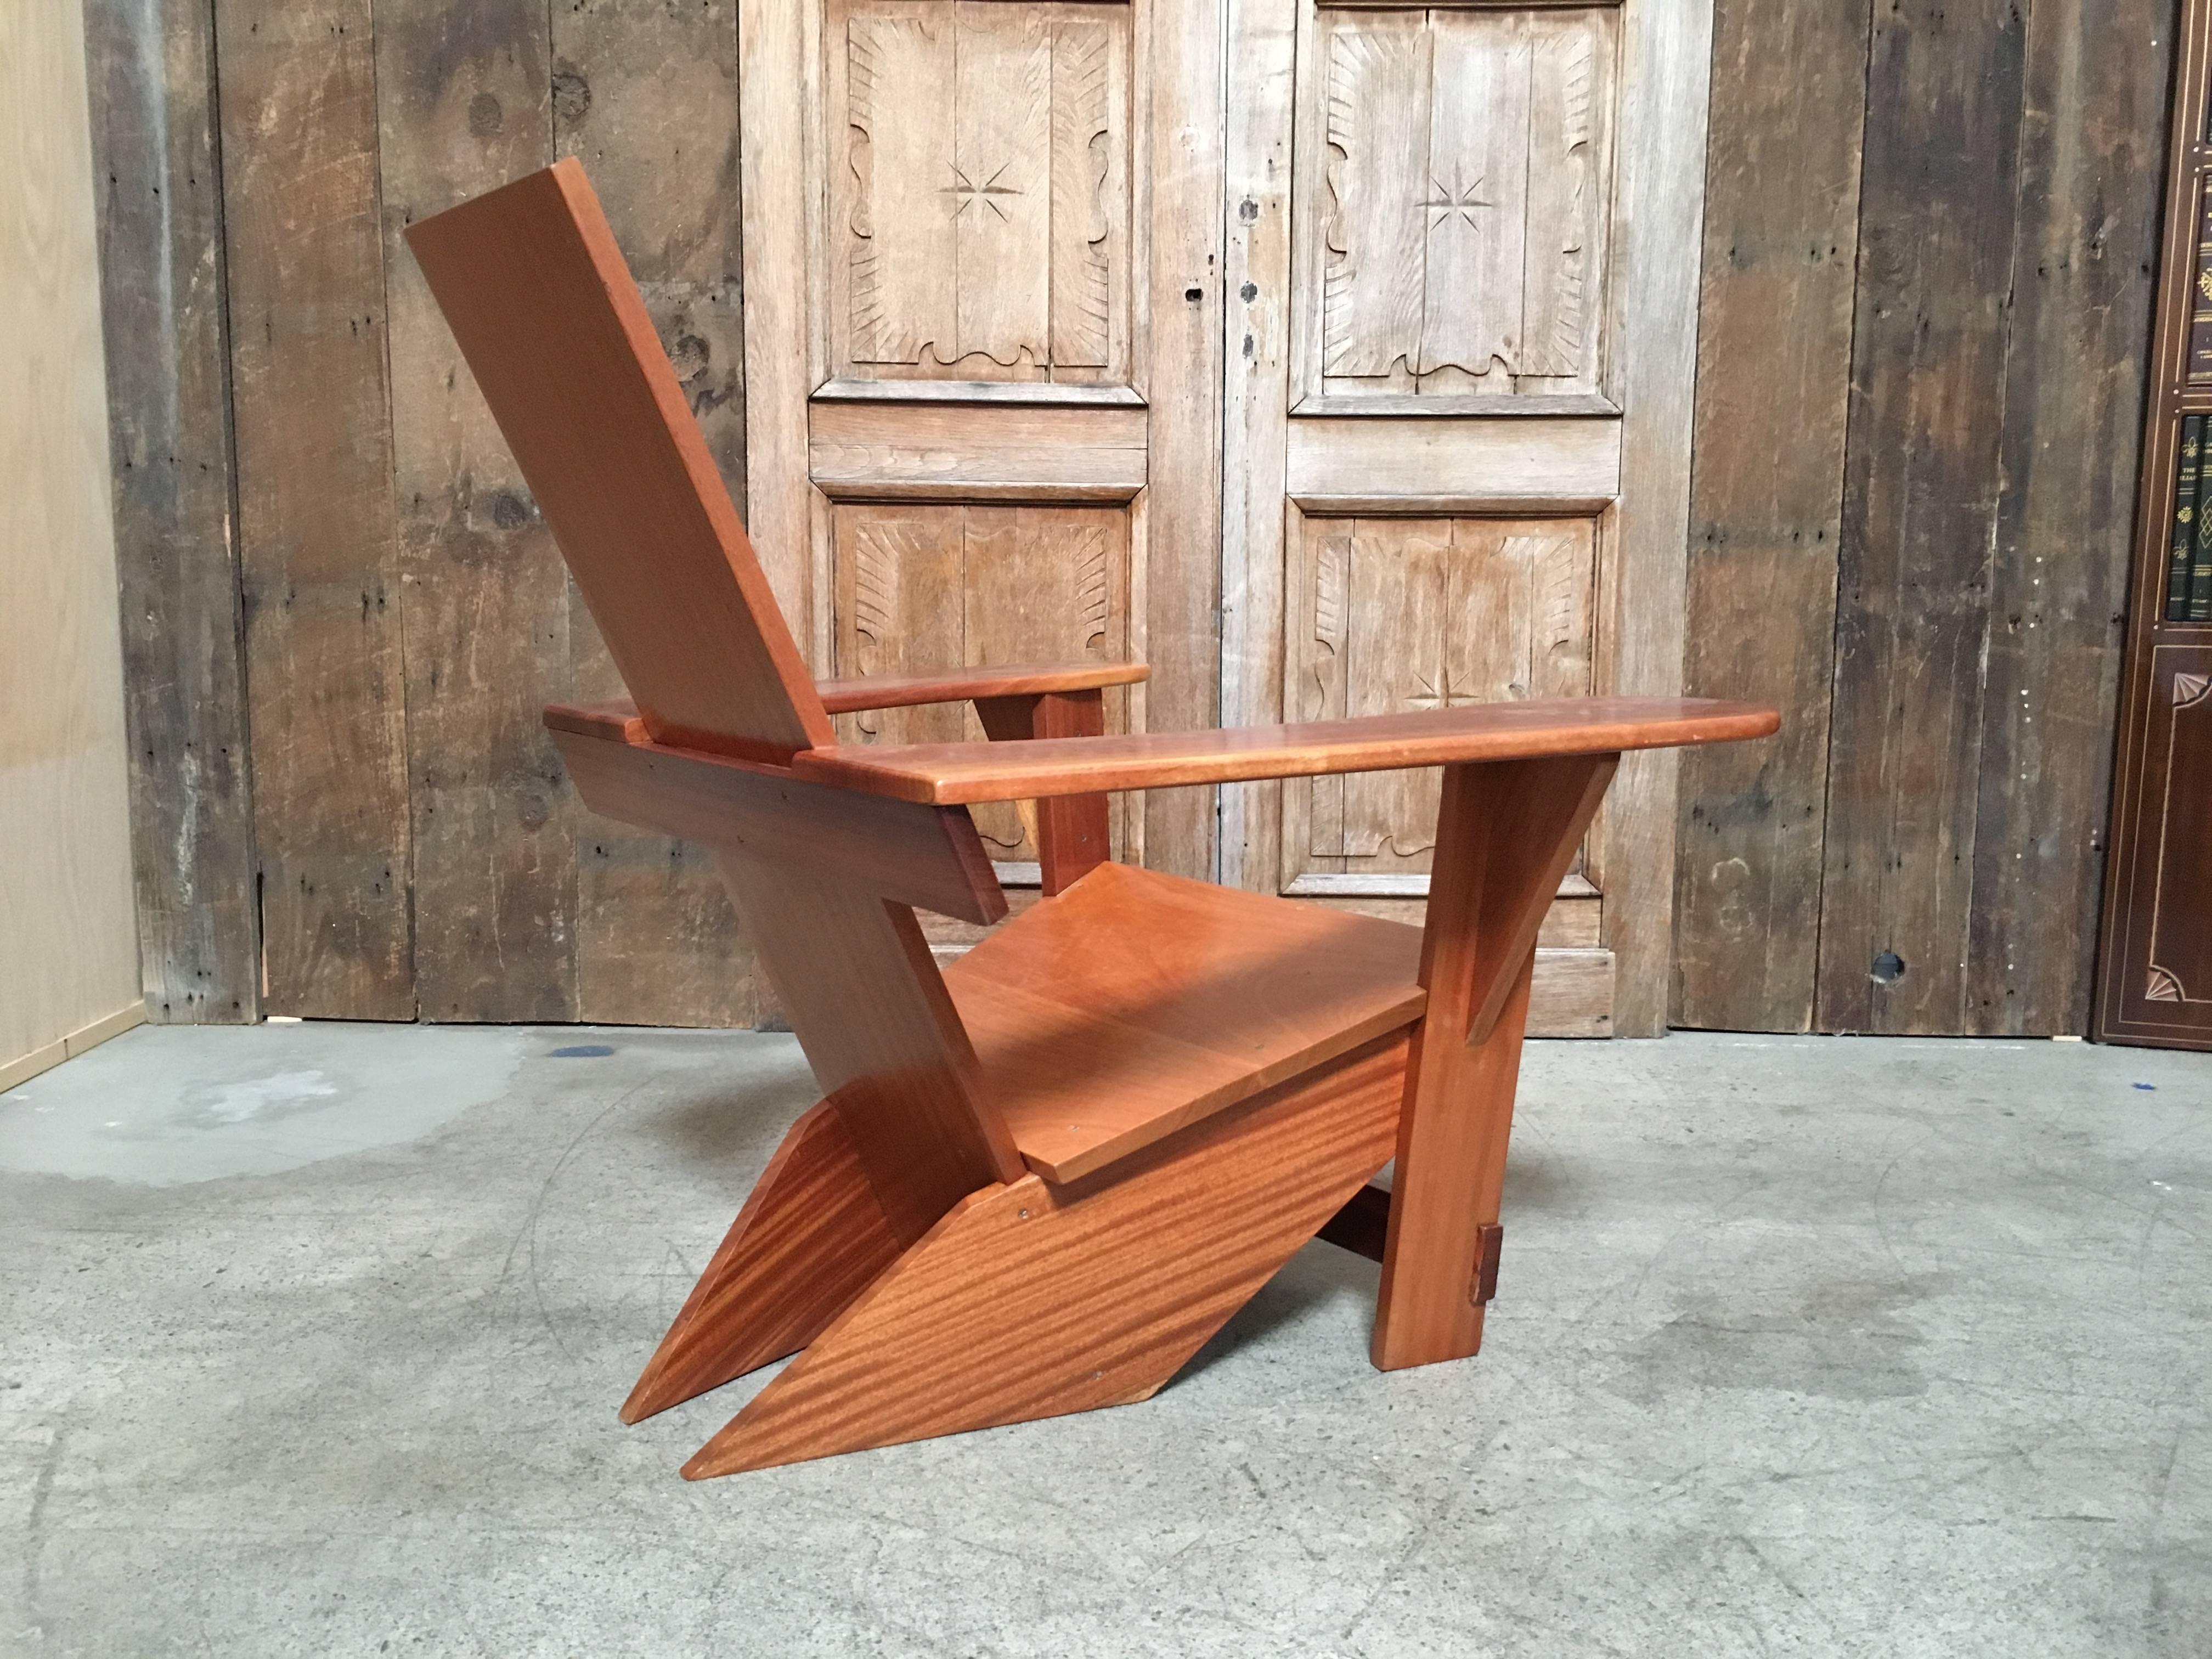 Rich mahogany handcrafted adirondack chair with a modernist flair with exposed brass screws.